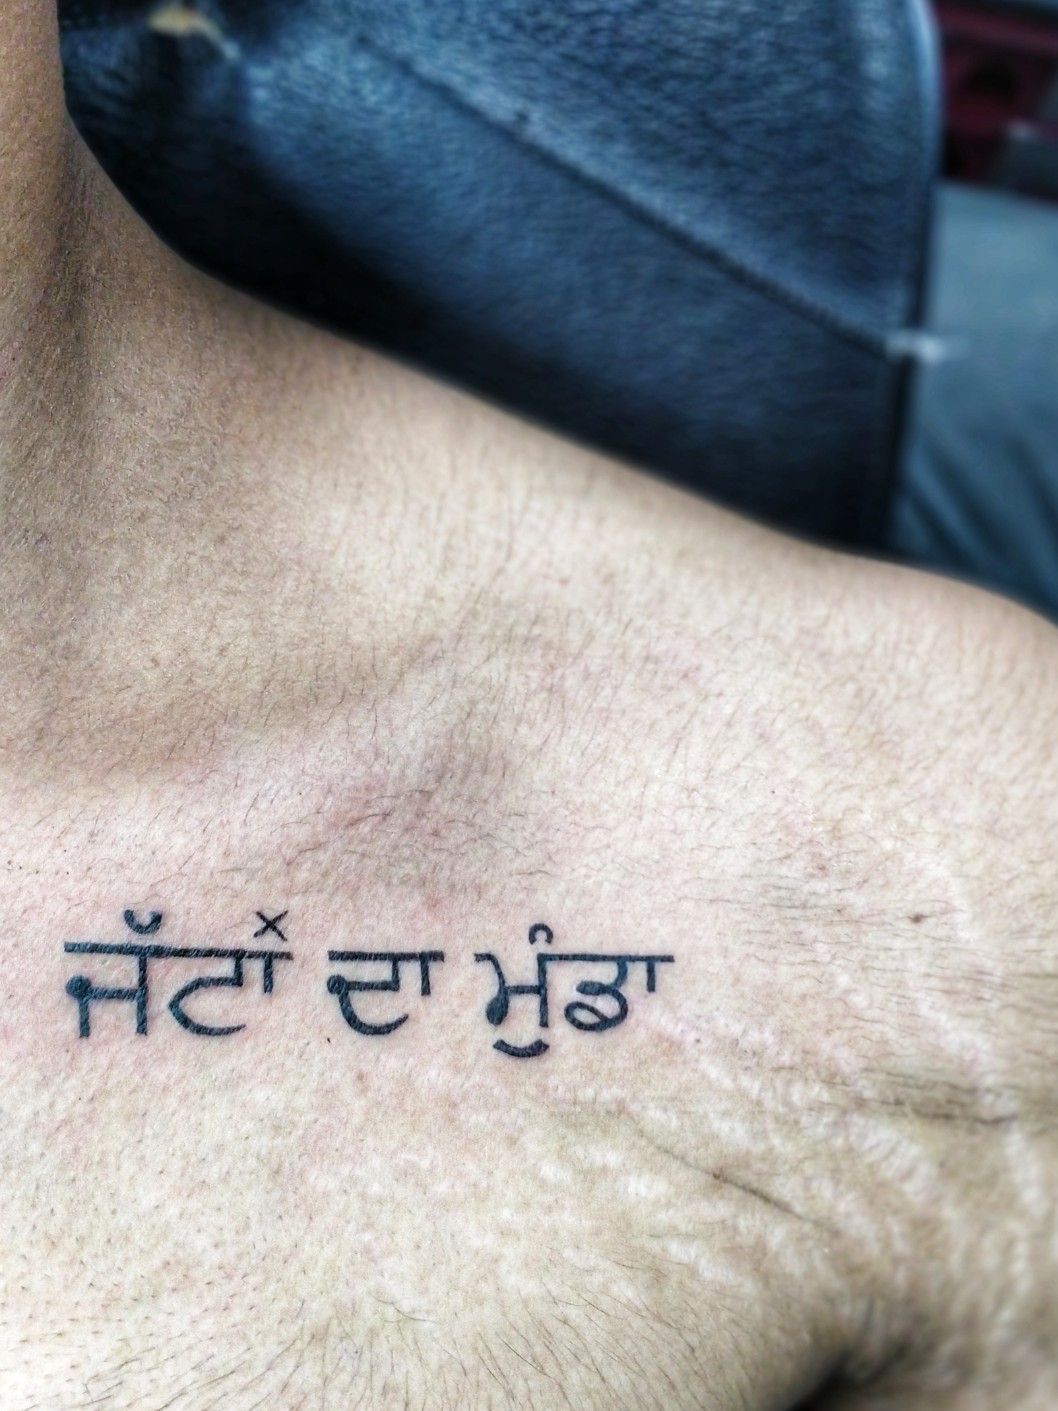 Pardeep Kumar  Heres a Nirbho nirvair tattoo with trible Lion  Meaning without fear without hate Its a Punjabi religious tattoos  Hope you like all Contact for tattooing 7800000074 pardeep  Kumar Nirbho